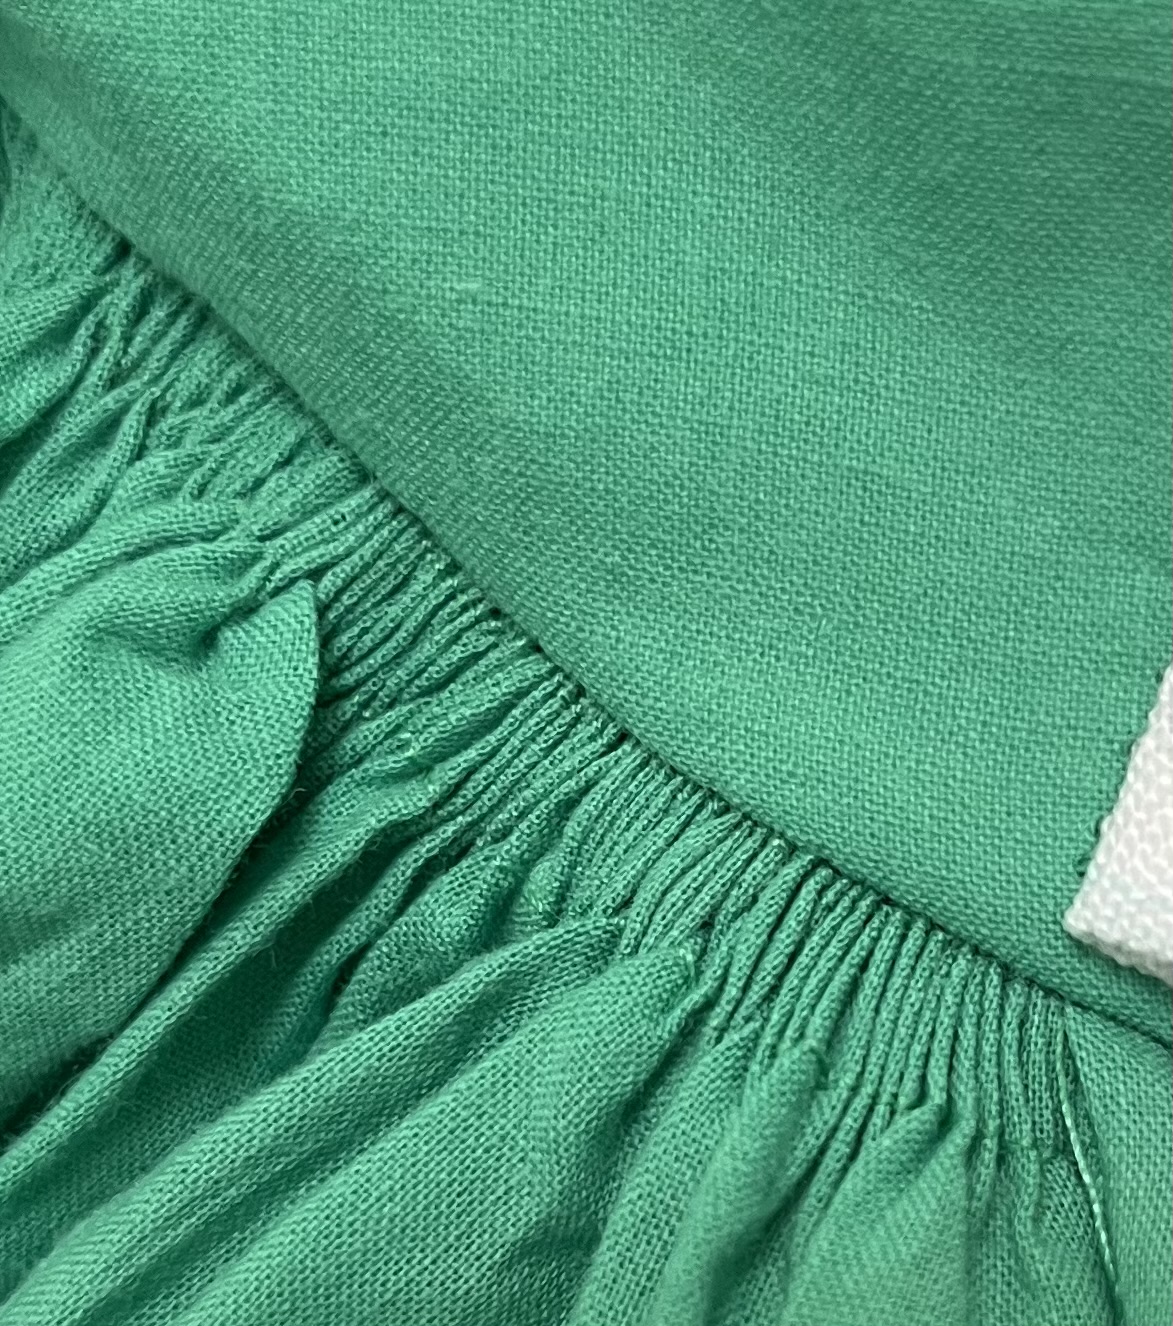 A close-up of a green cotton voile panel stitched to another piece of green cotton fabric.